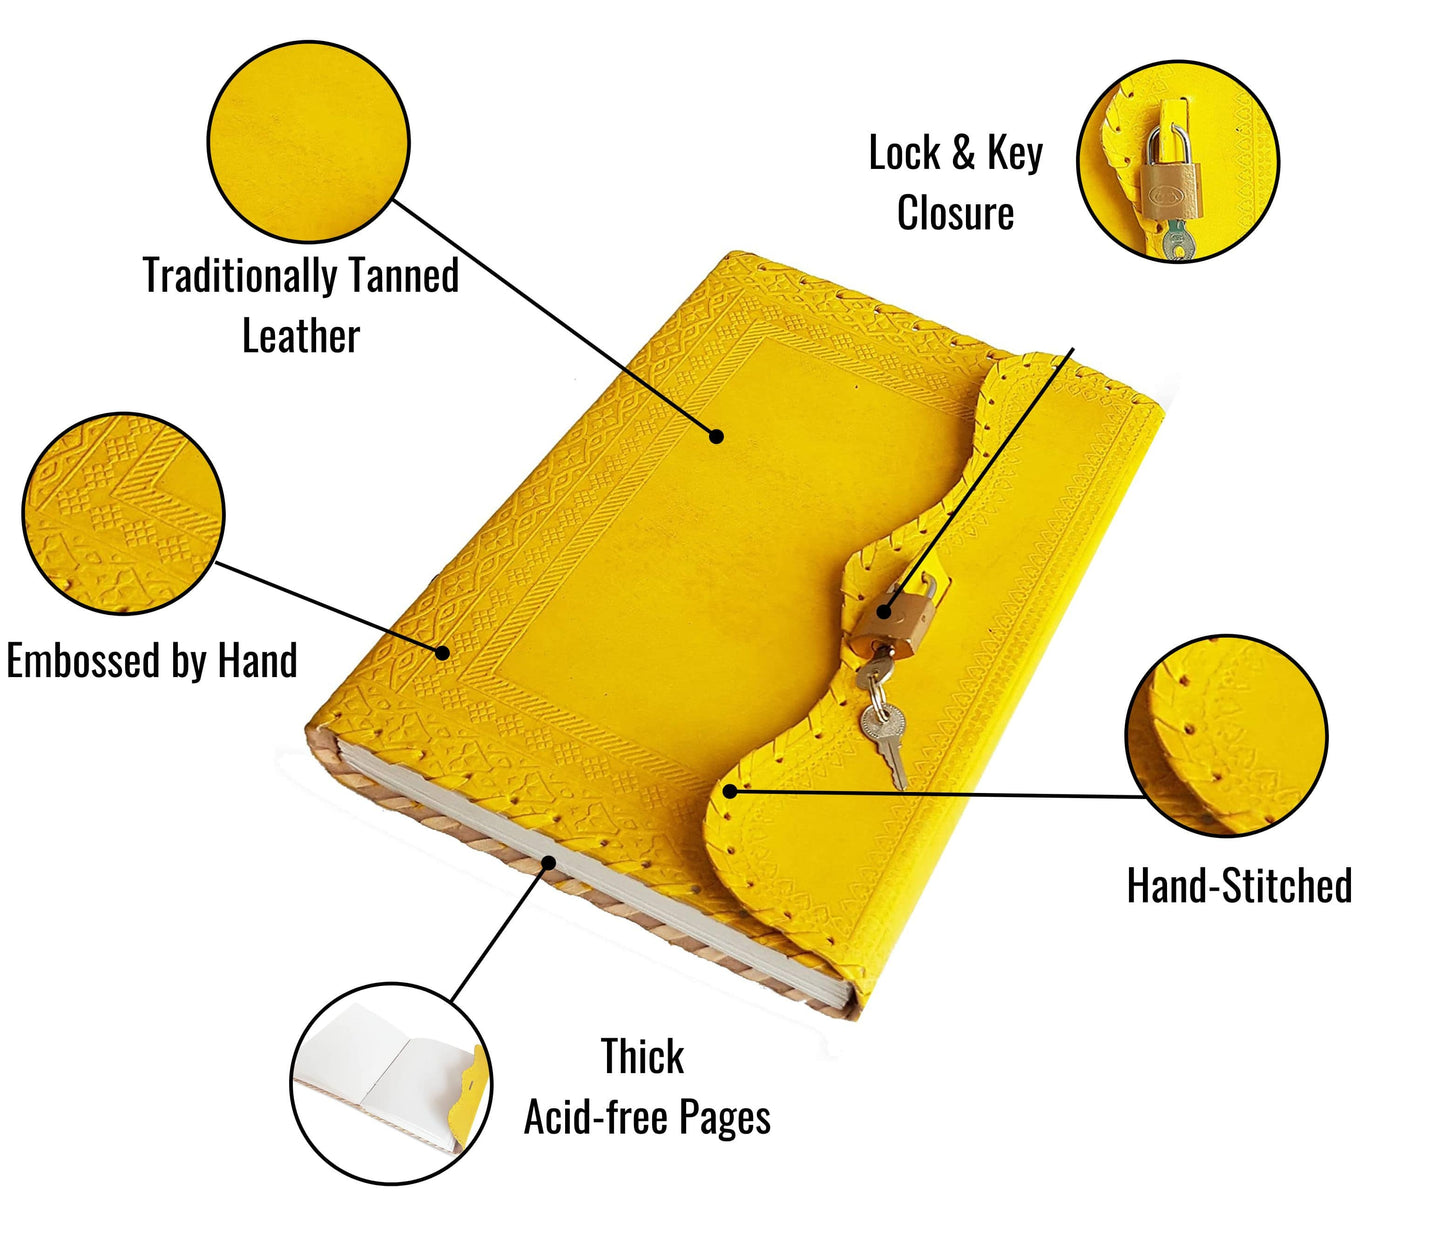 Handmade Vintage Yellow Leather Journal with Lock